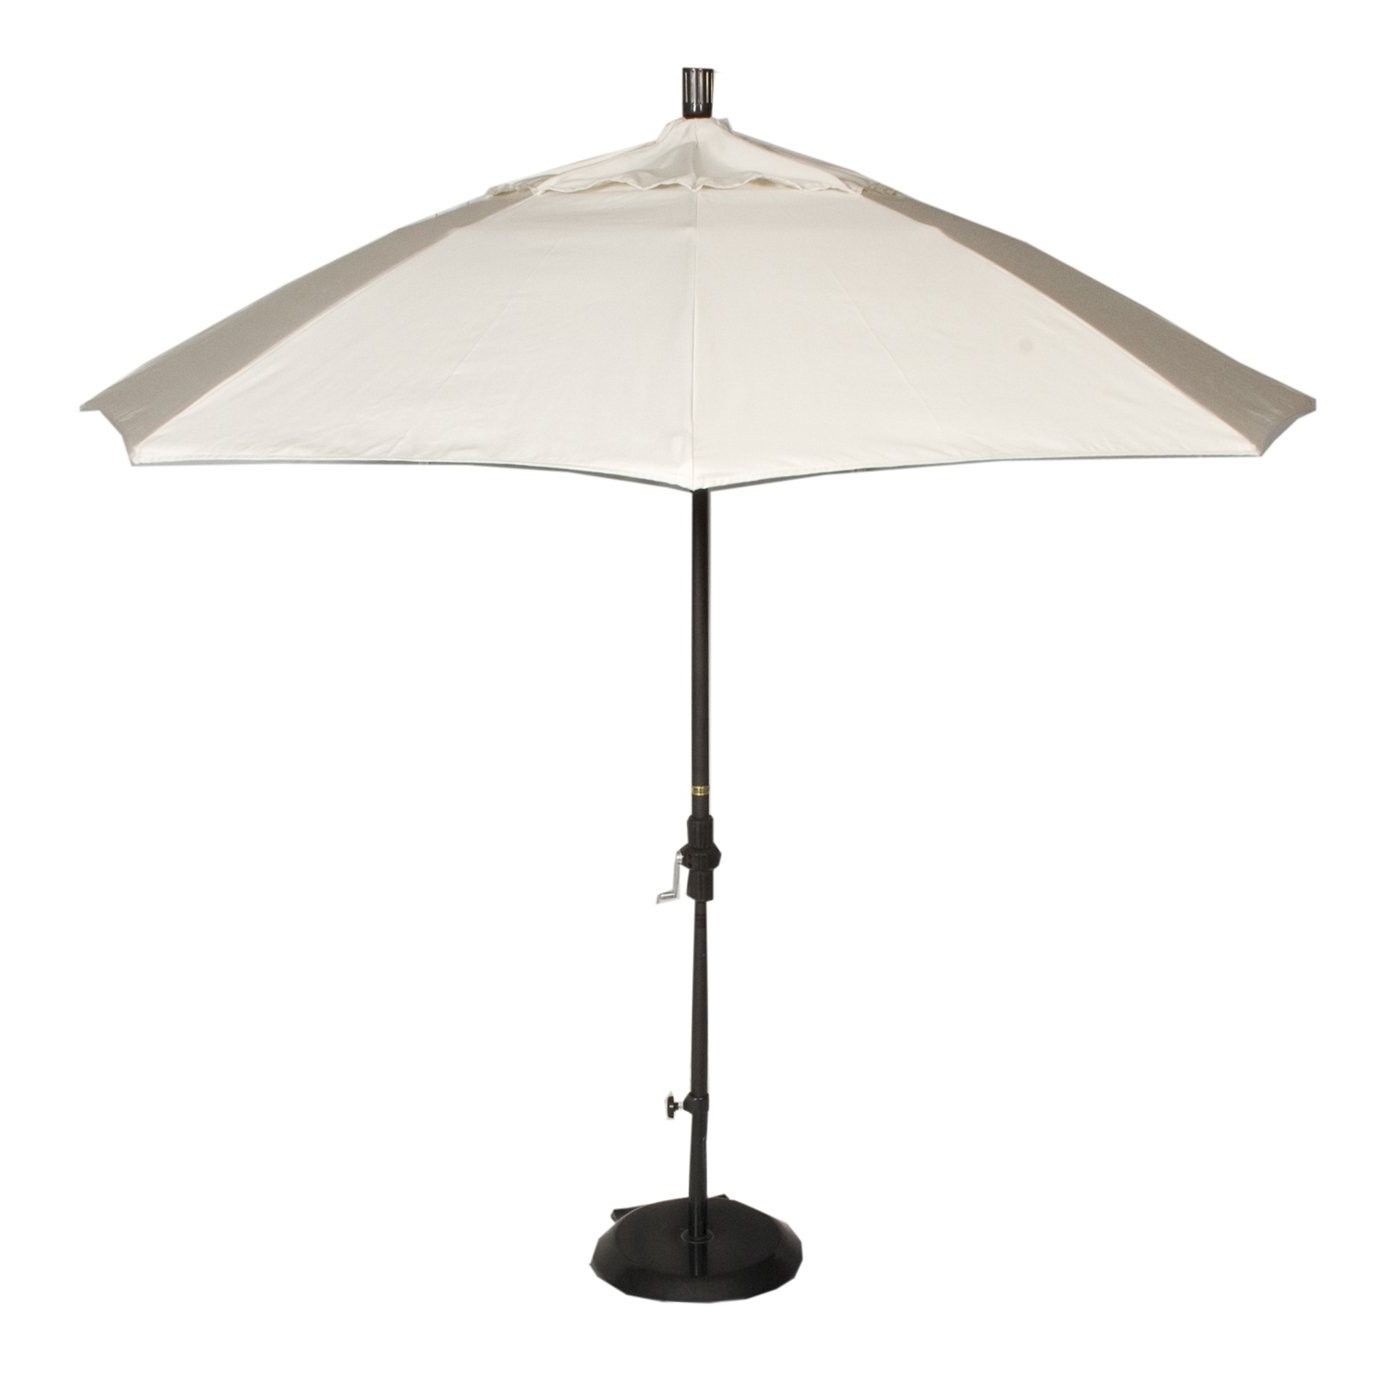 Phat Tommy Outdoor Oasis 9 Ft Aluminum Market Umbrella With For Most Recently Released Patio Umbrellas With Sunbrella Fabric (View 13 of 20)